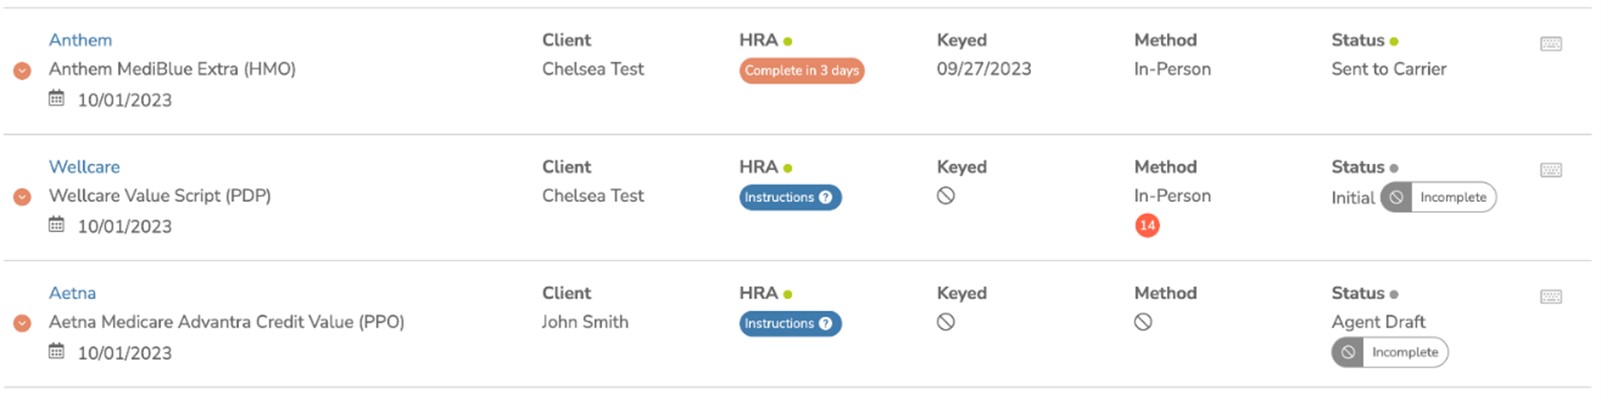 Ritter Platform HRA Submission Records View